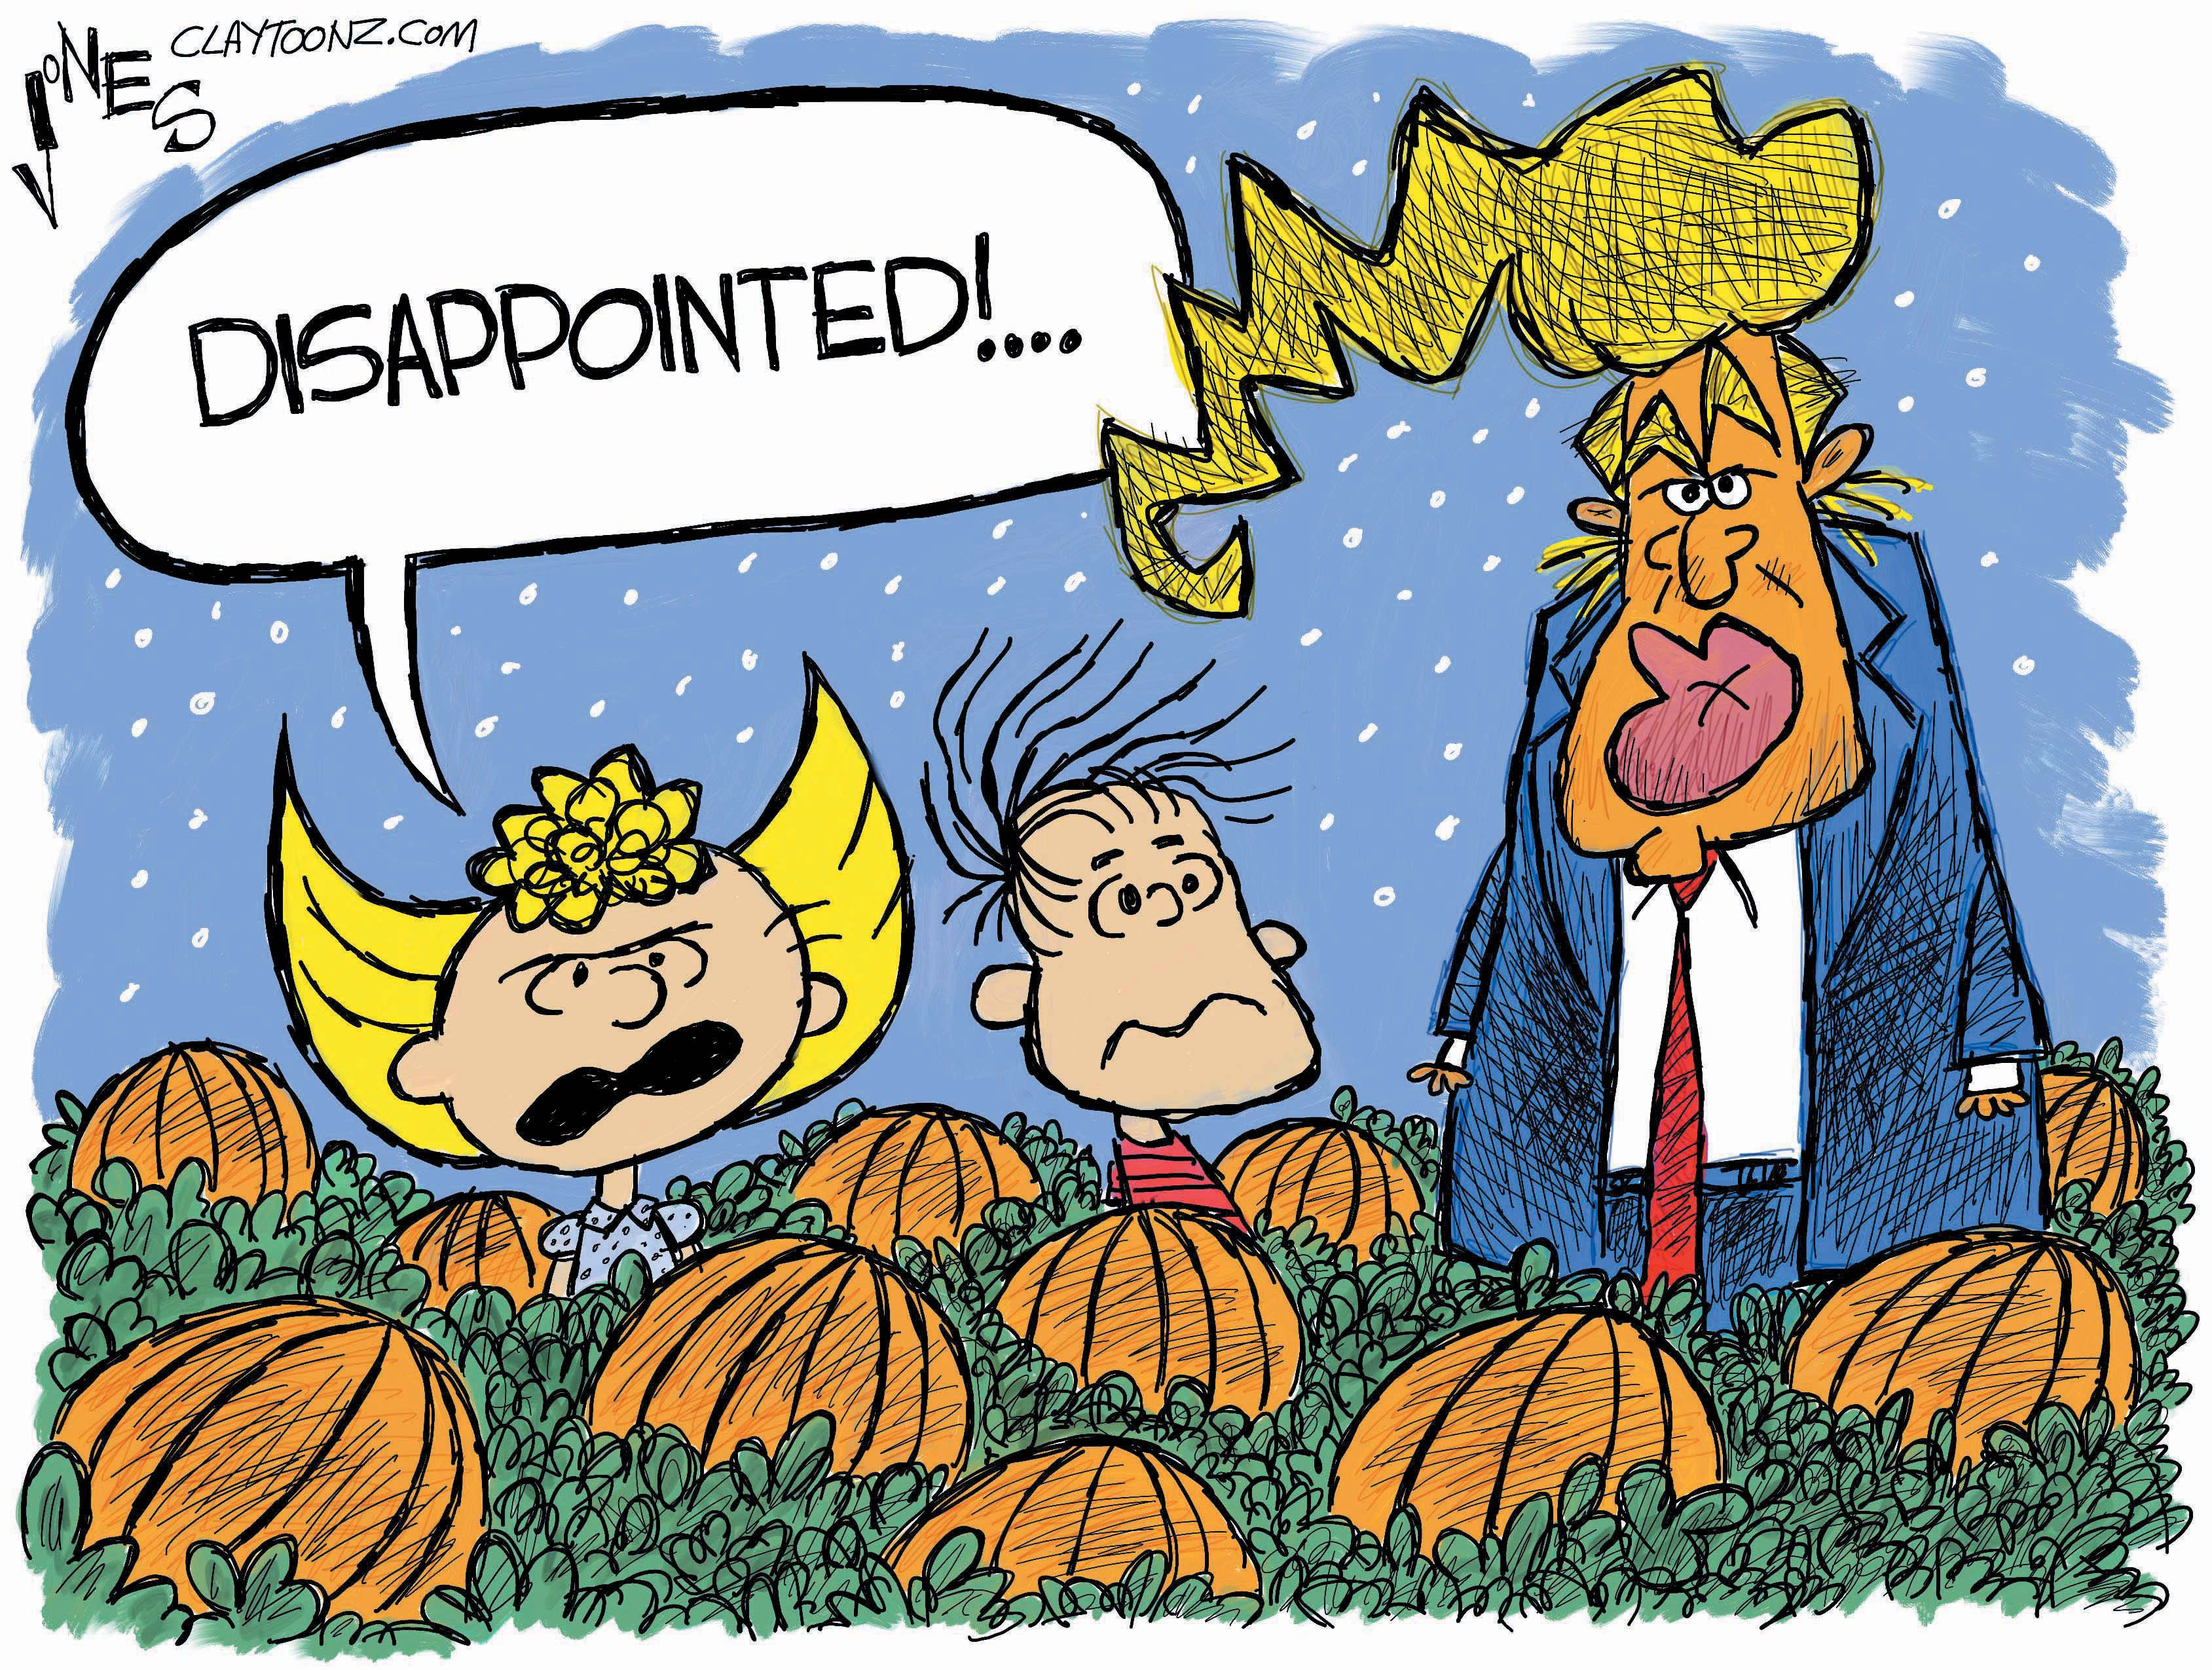 Political cartoon U.S. 2016 election Donald Trump Charlie Brown disappointment